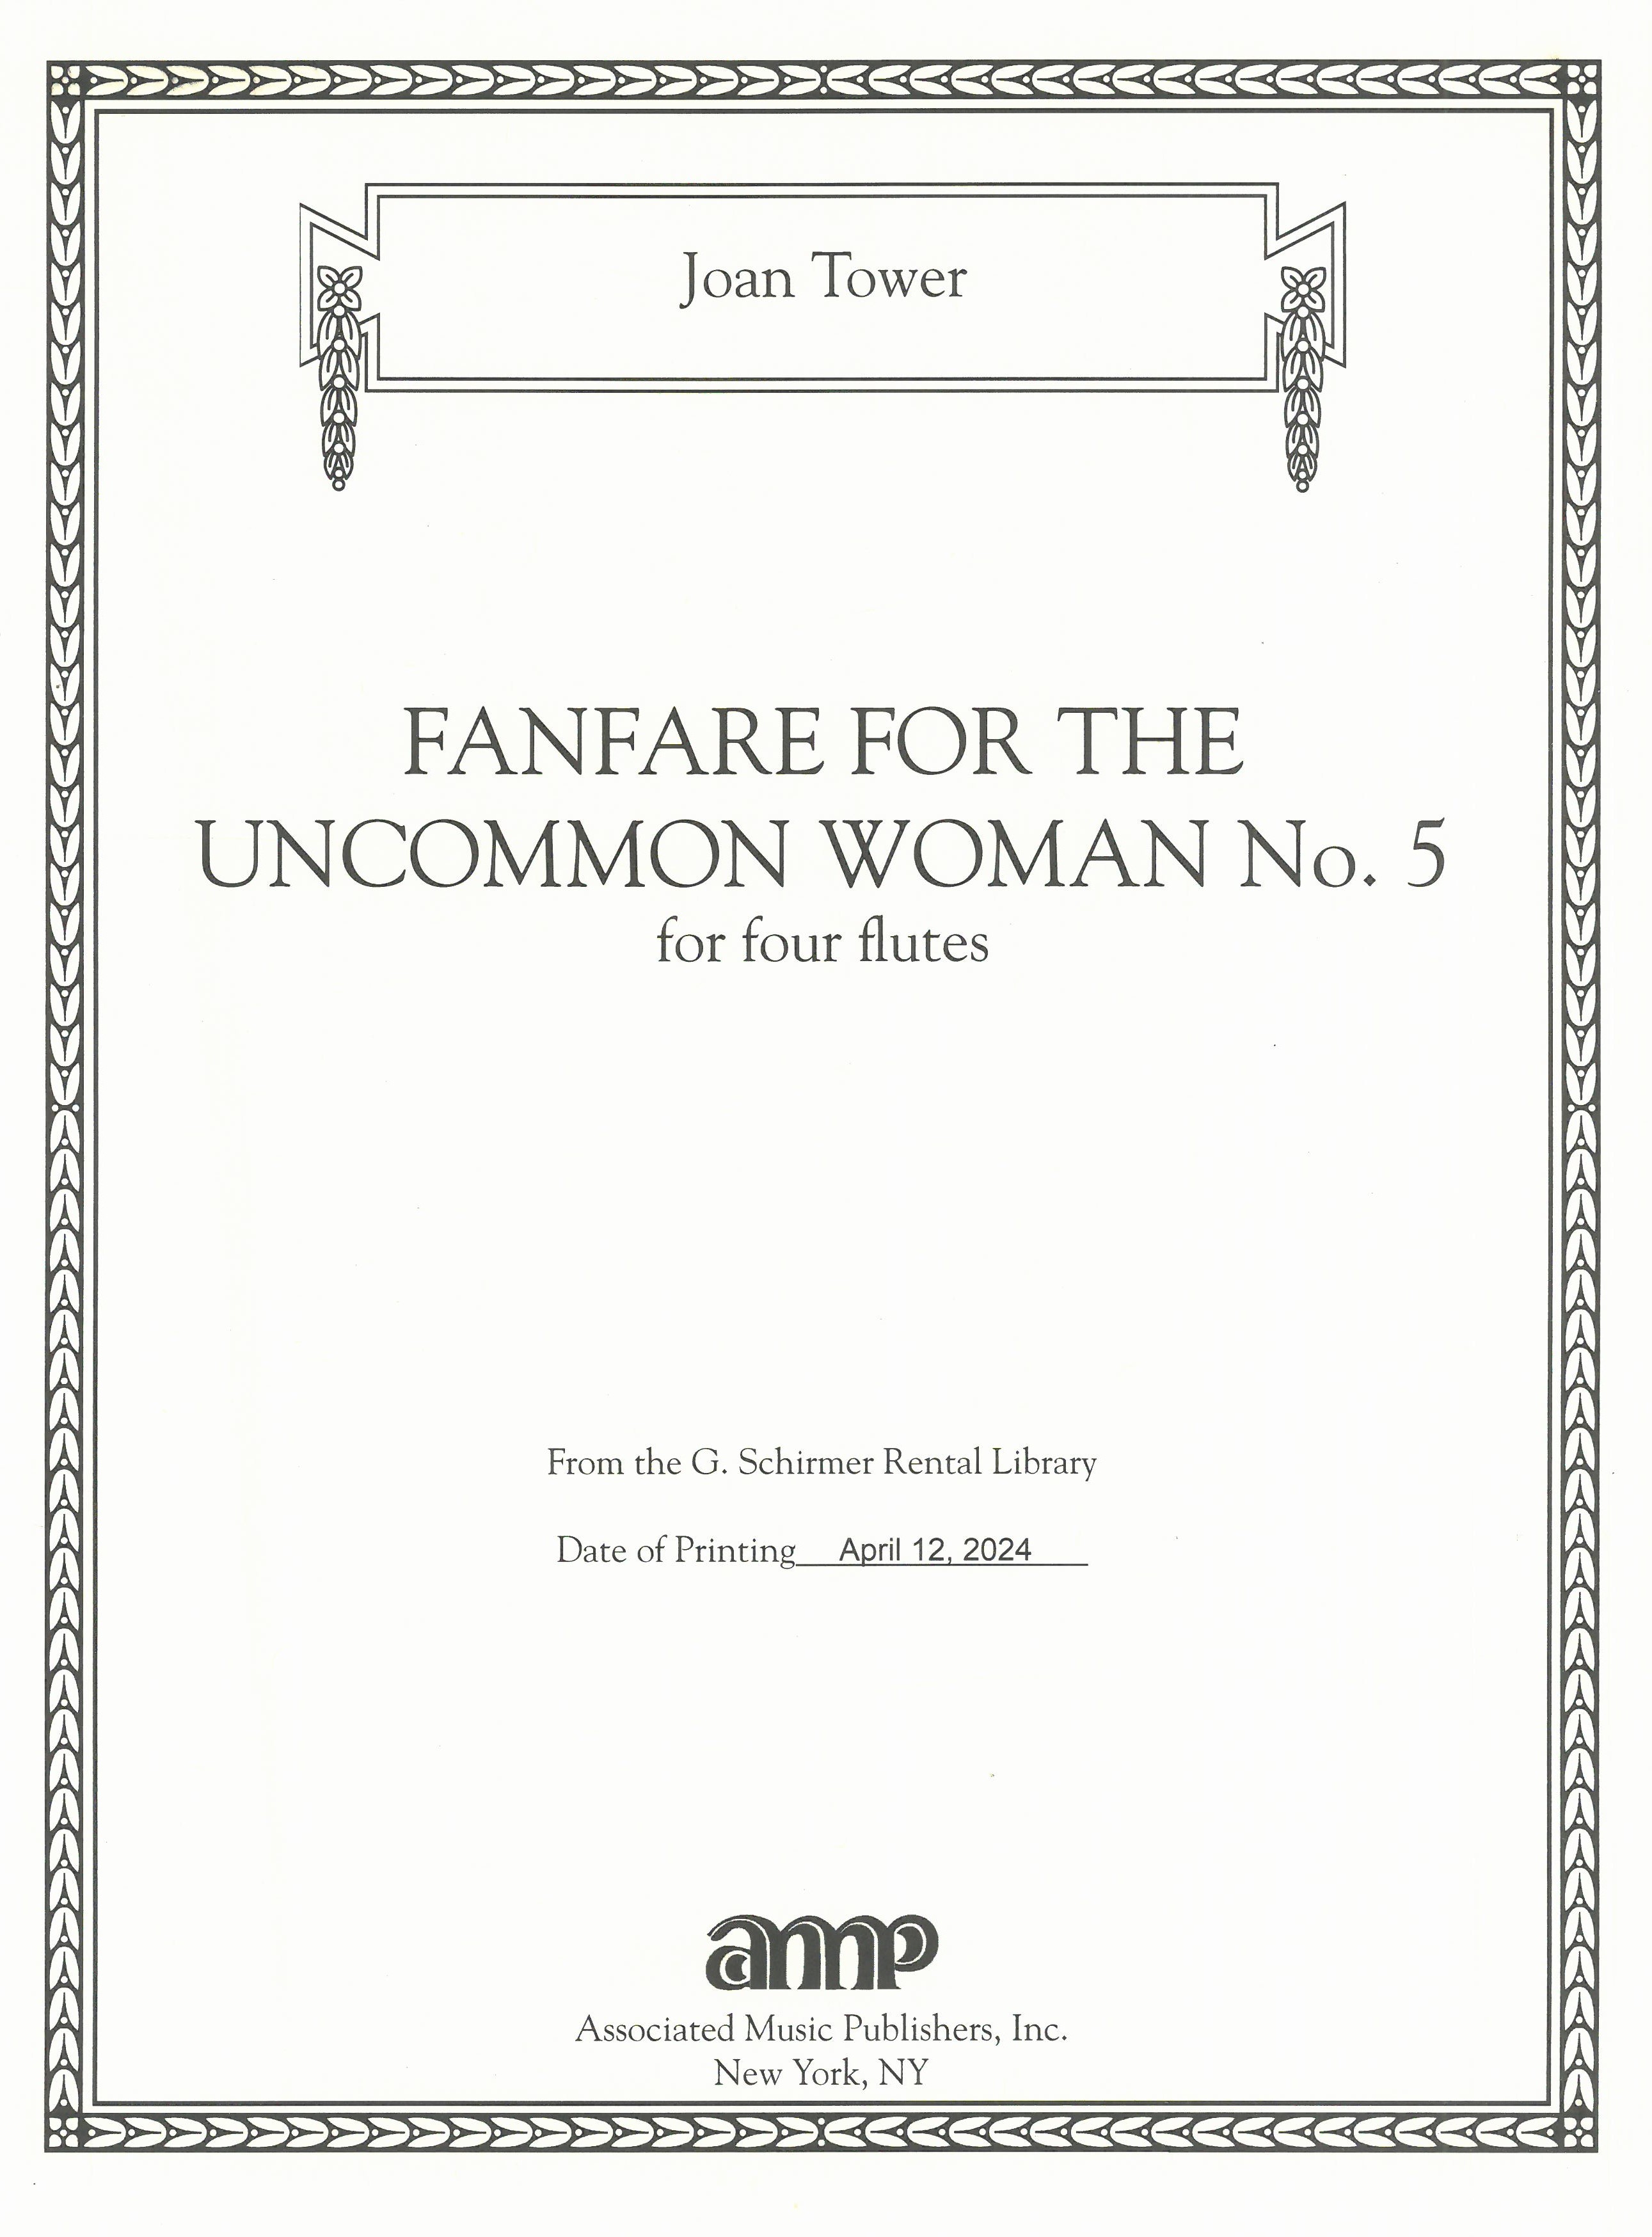 Fanfare For The Uncommon Woman, No. 5 : For Four Flutes.